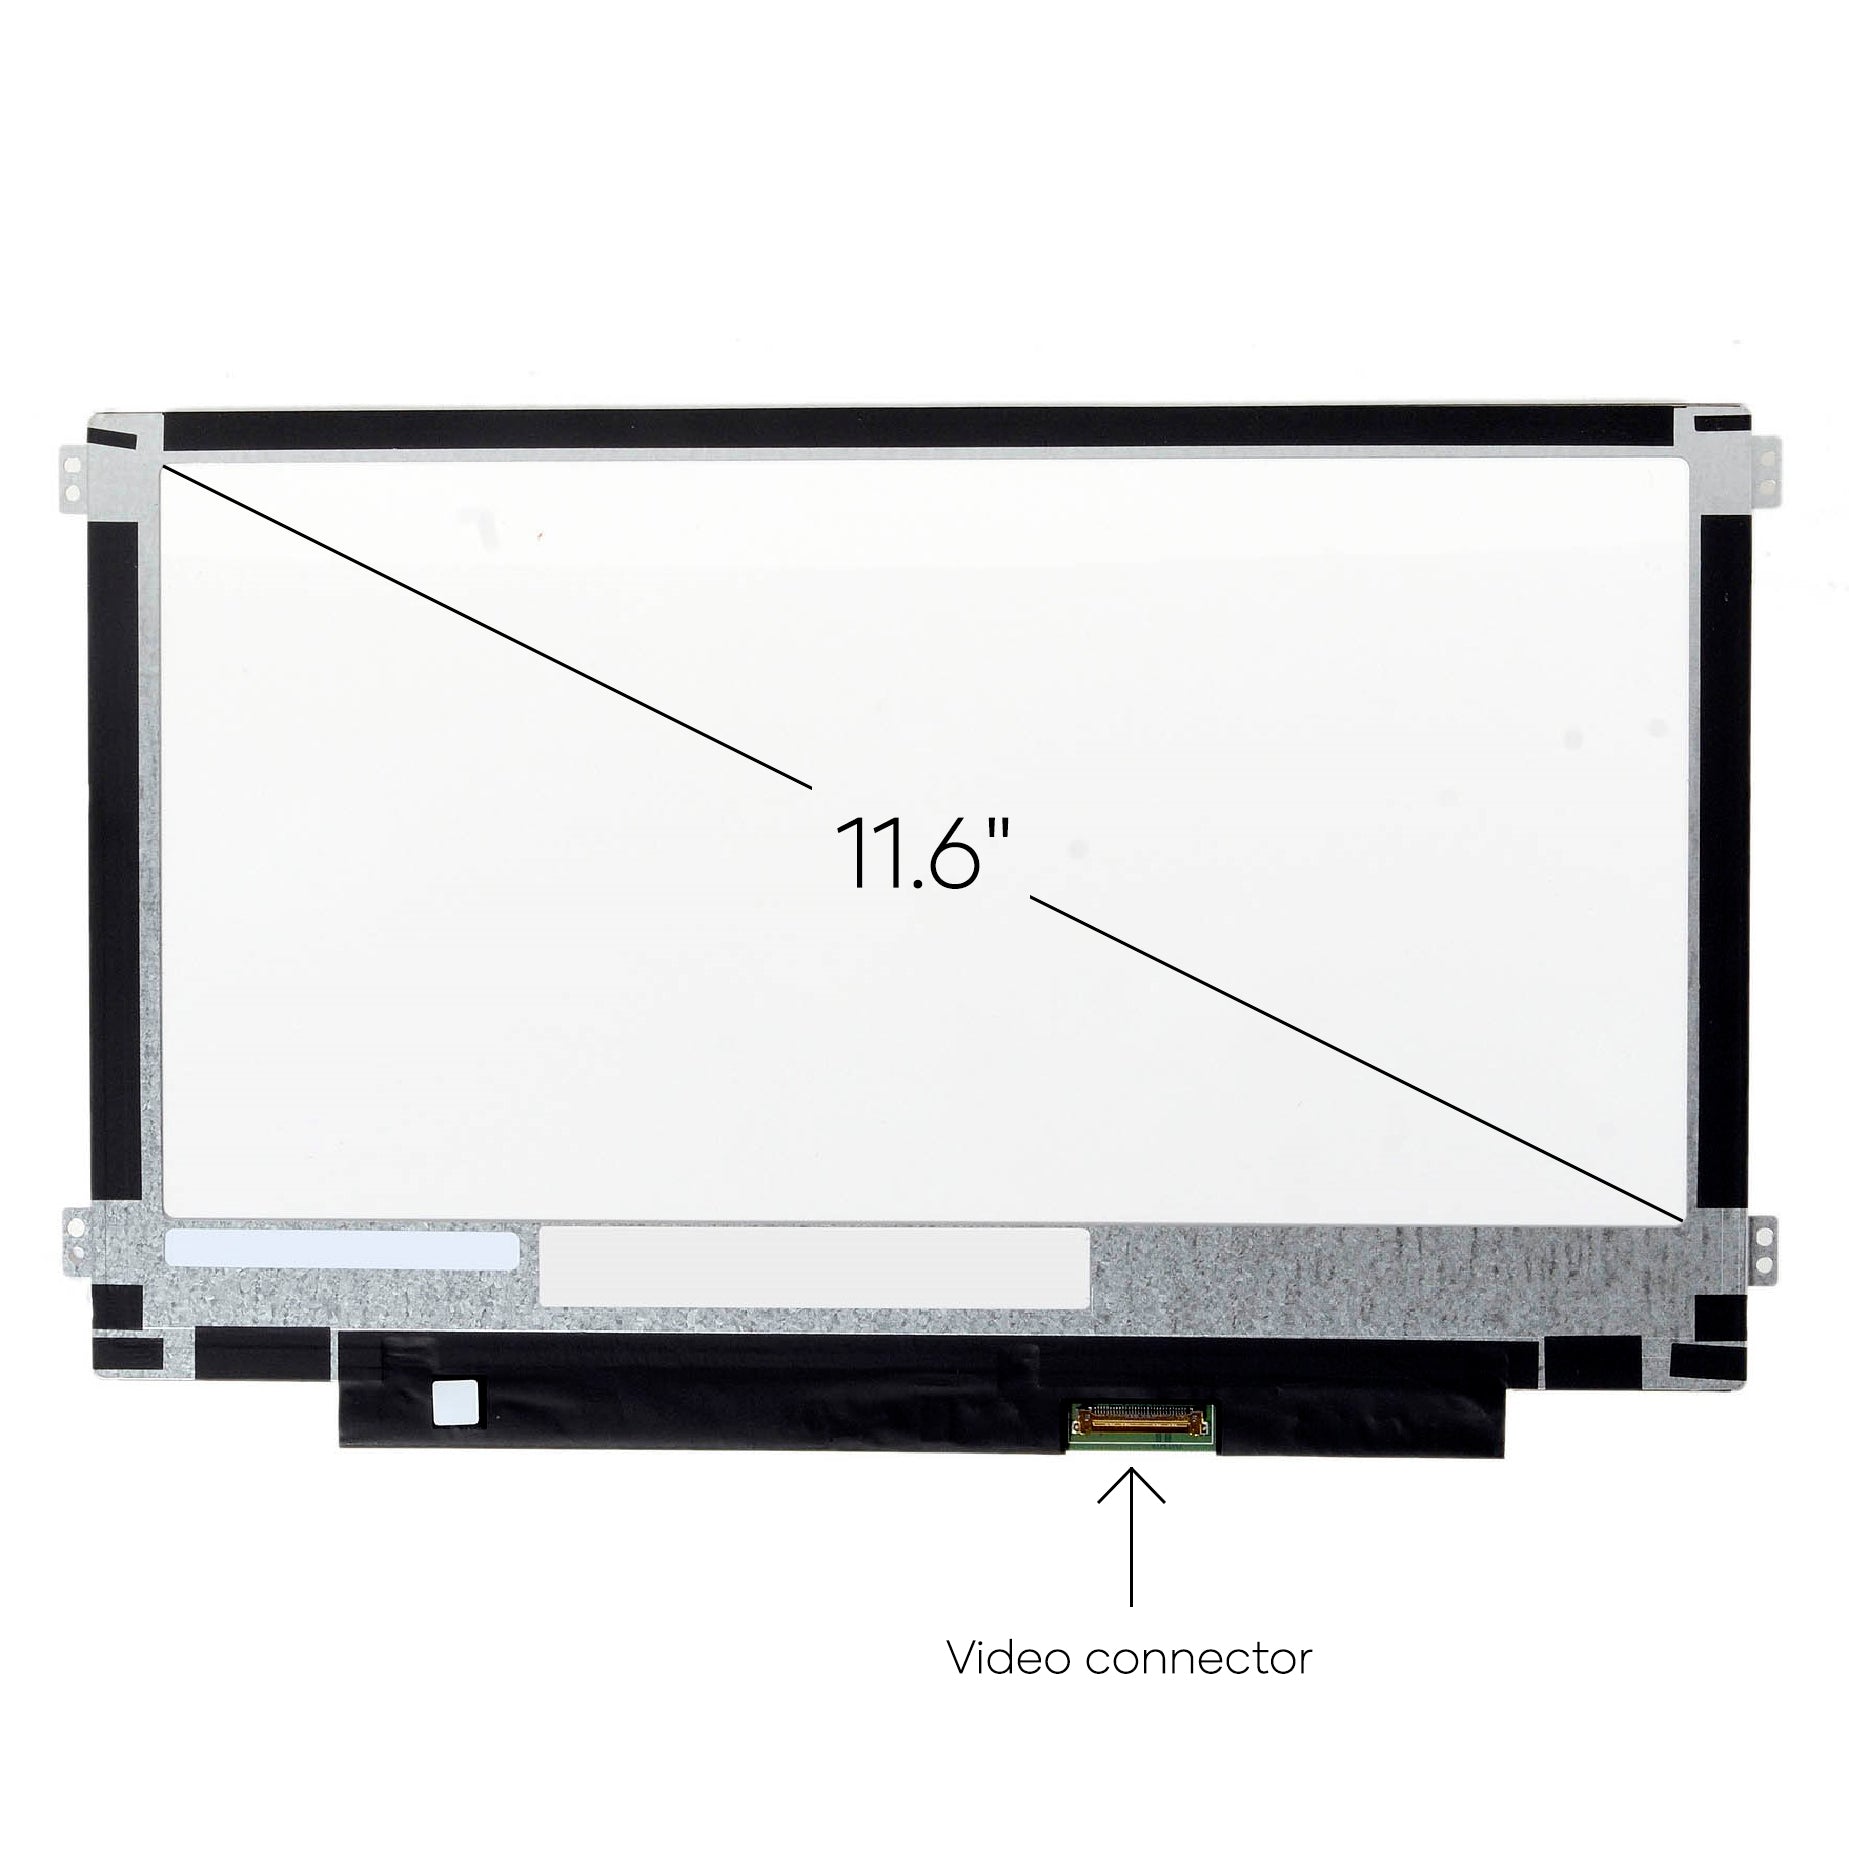 Screen Replacement for Samsung XE503C12 CHROMEBOOK Series 11.6" LED LCD Display Panel HD